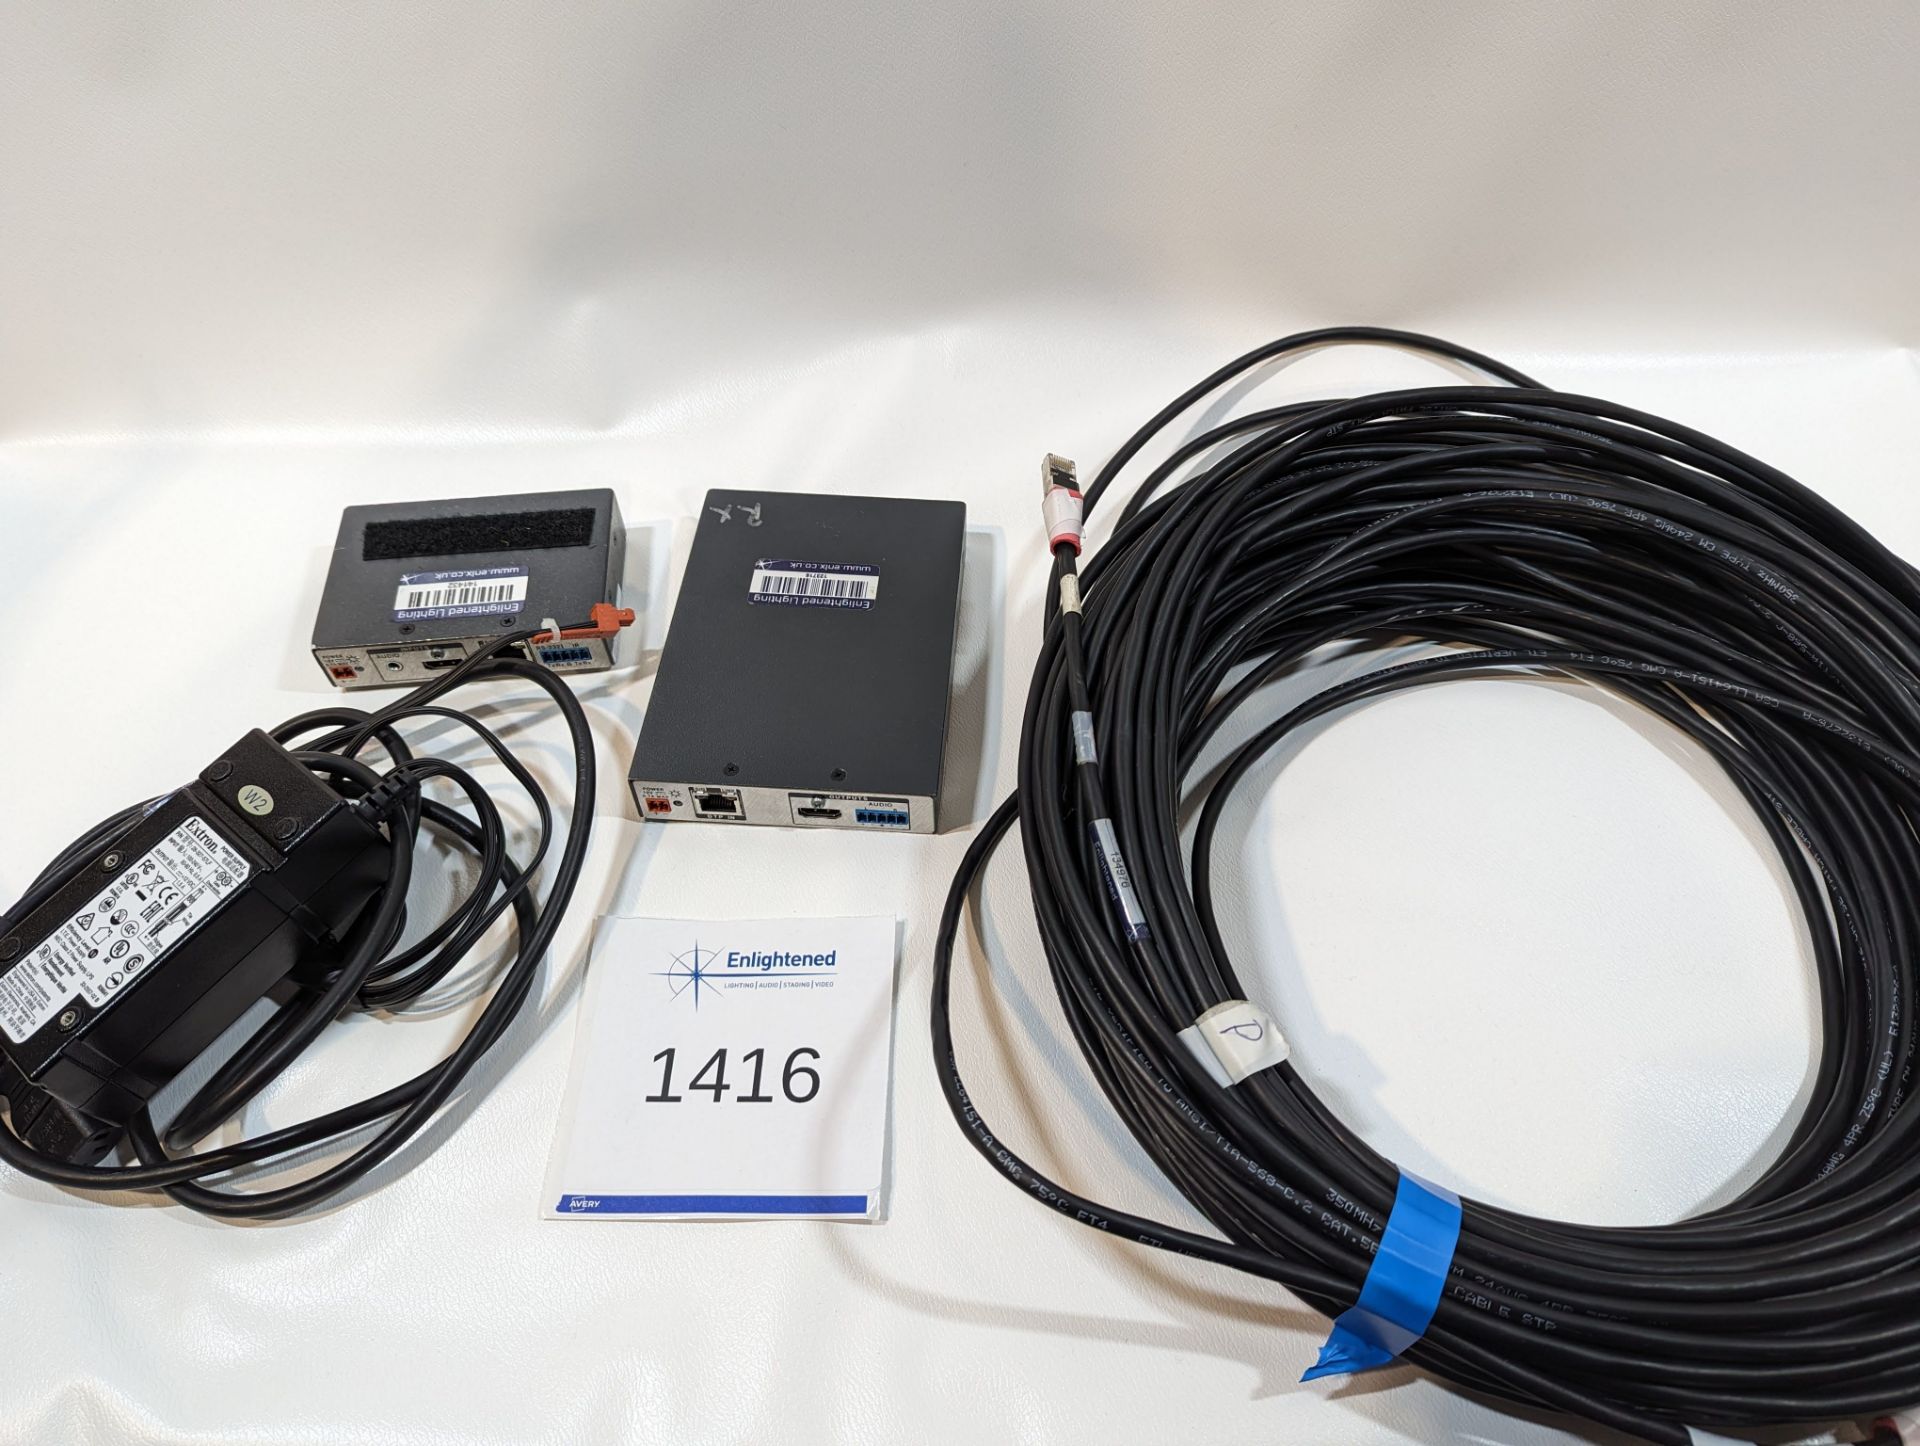 Extron hdmi over cat 5 kits inc 50m cat5 - Image 4 of 5